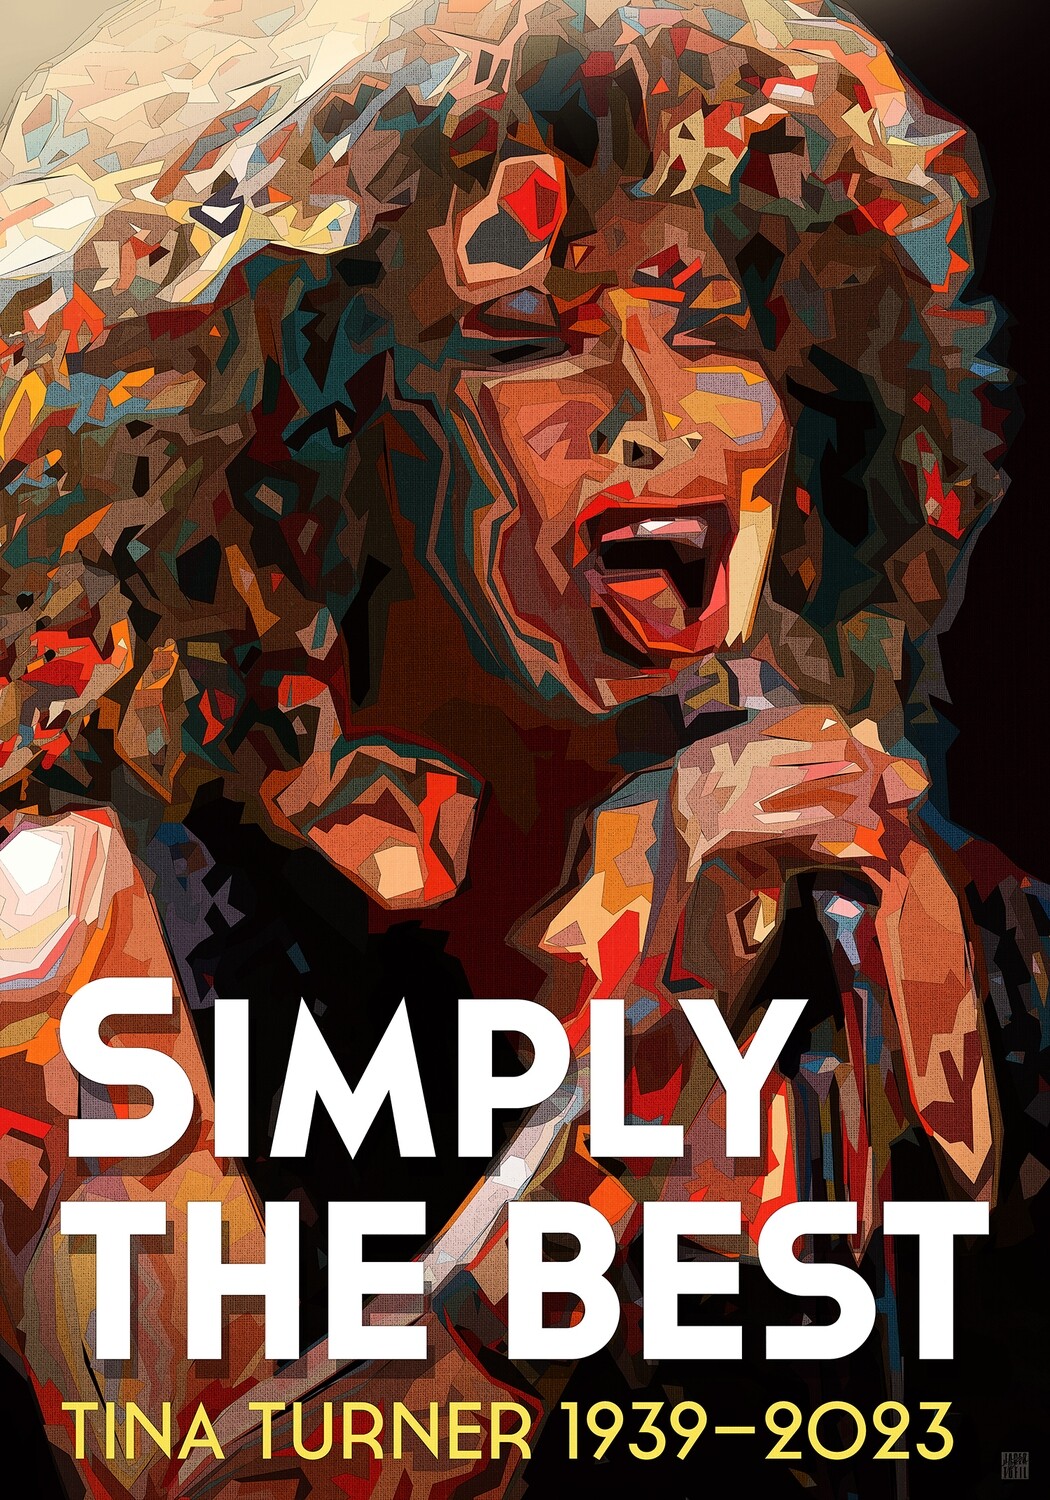 SIMPLY THE BEST – Tina Turner 1939-2023